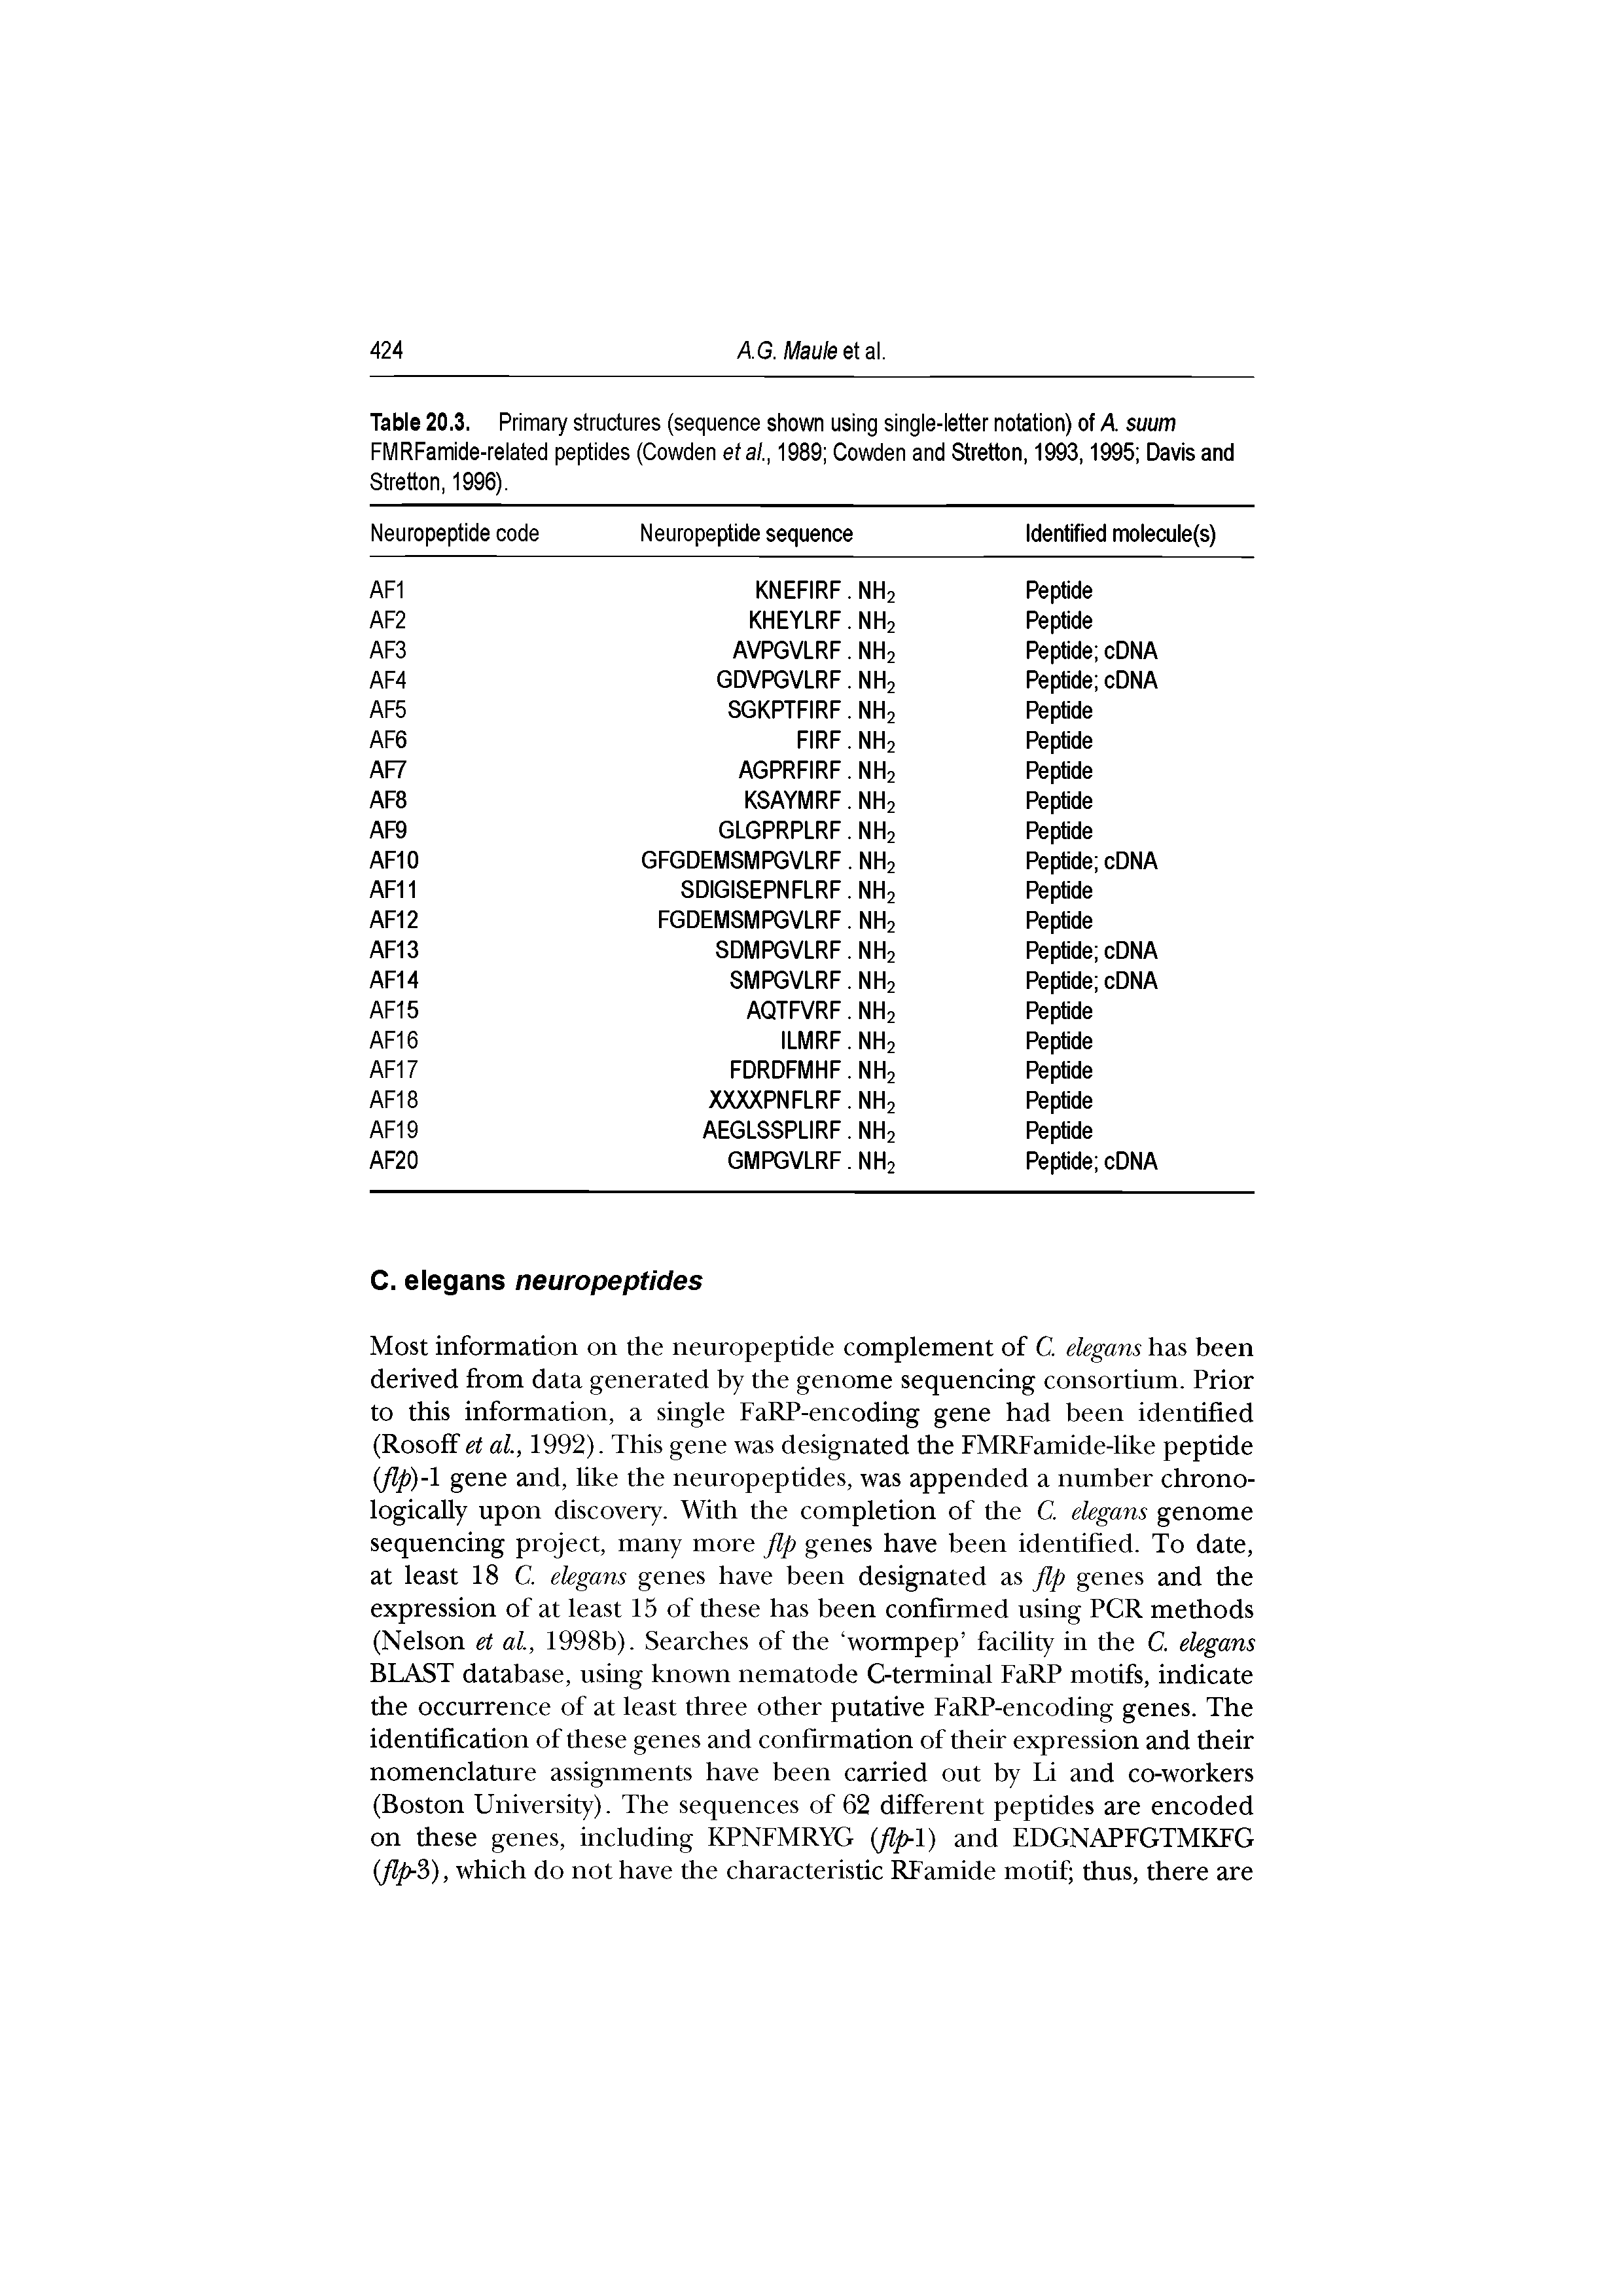 Table 20.3. Primary structures (sequence shown using single-letter notation) of A suum FMRFamide-related peptides (Cowden etal., 1989 Cowden and Stretton, 1993,1995 Davis and Stretton, 1996). ...